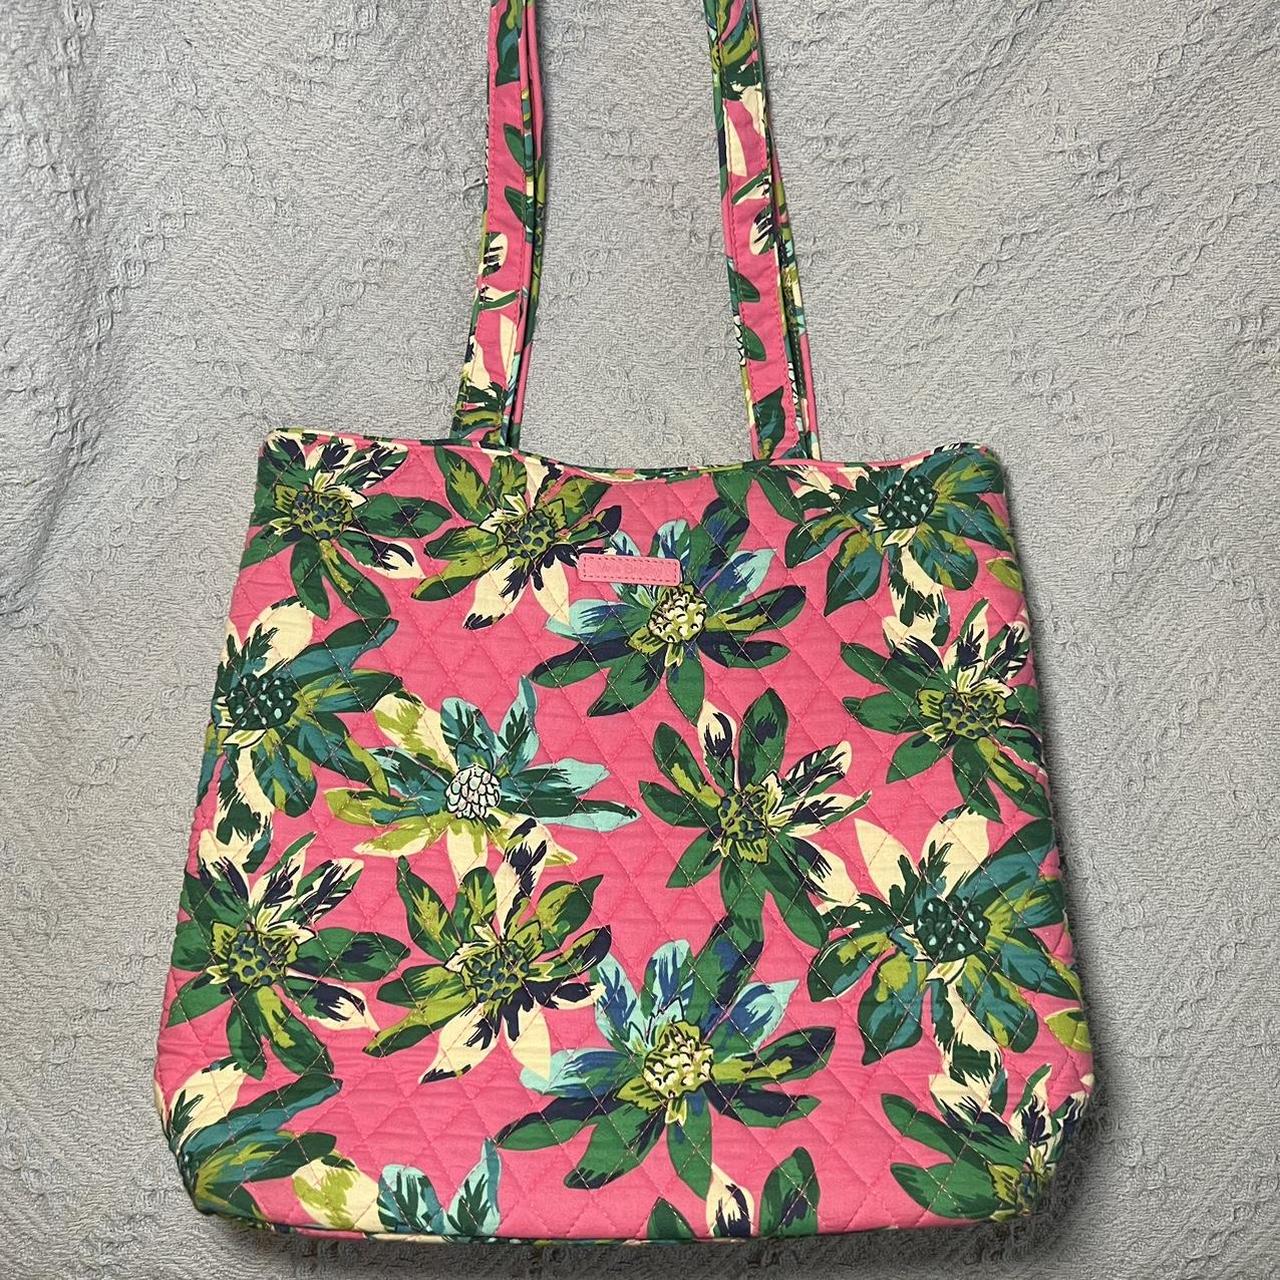 Women's Pink and Green Bag